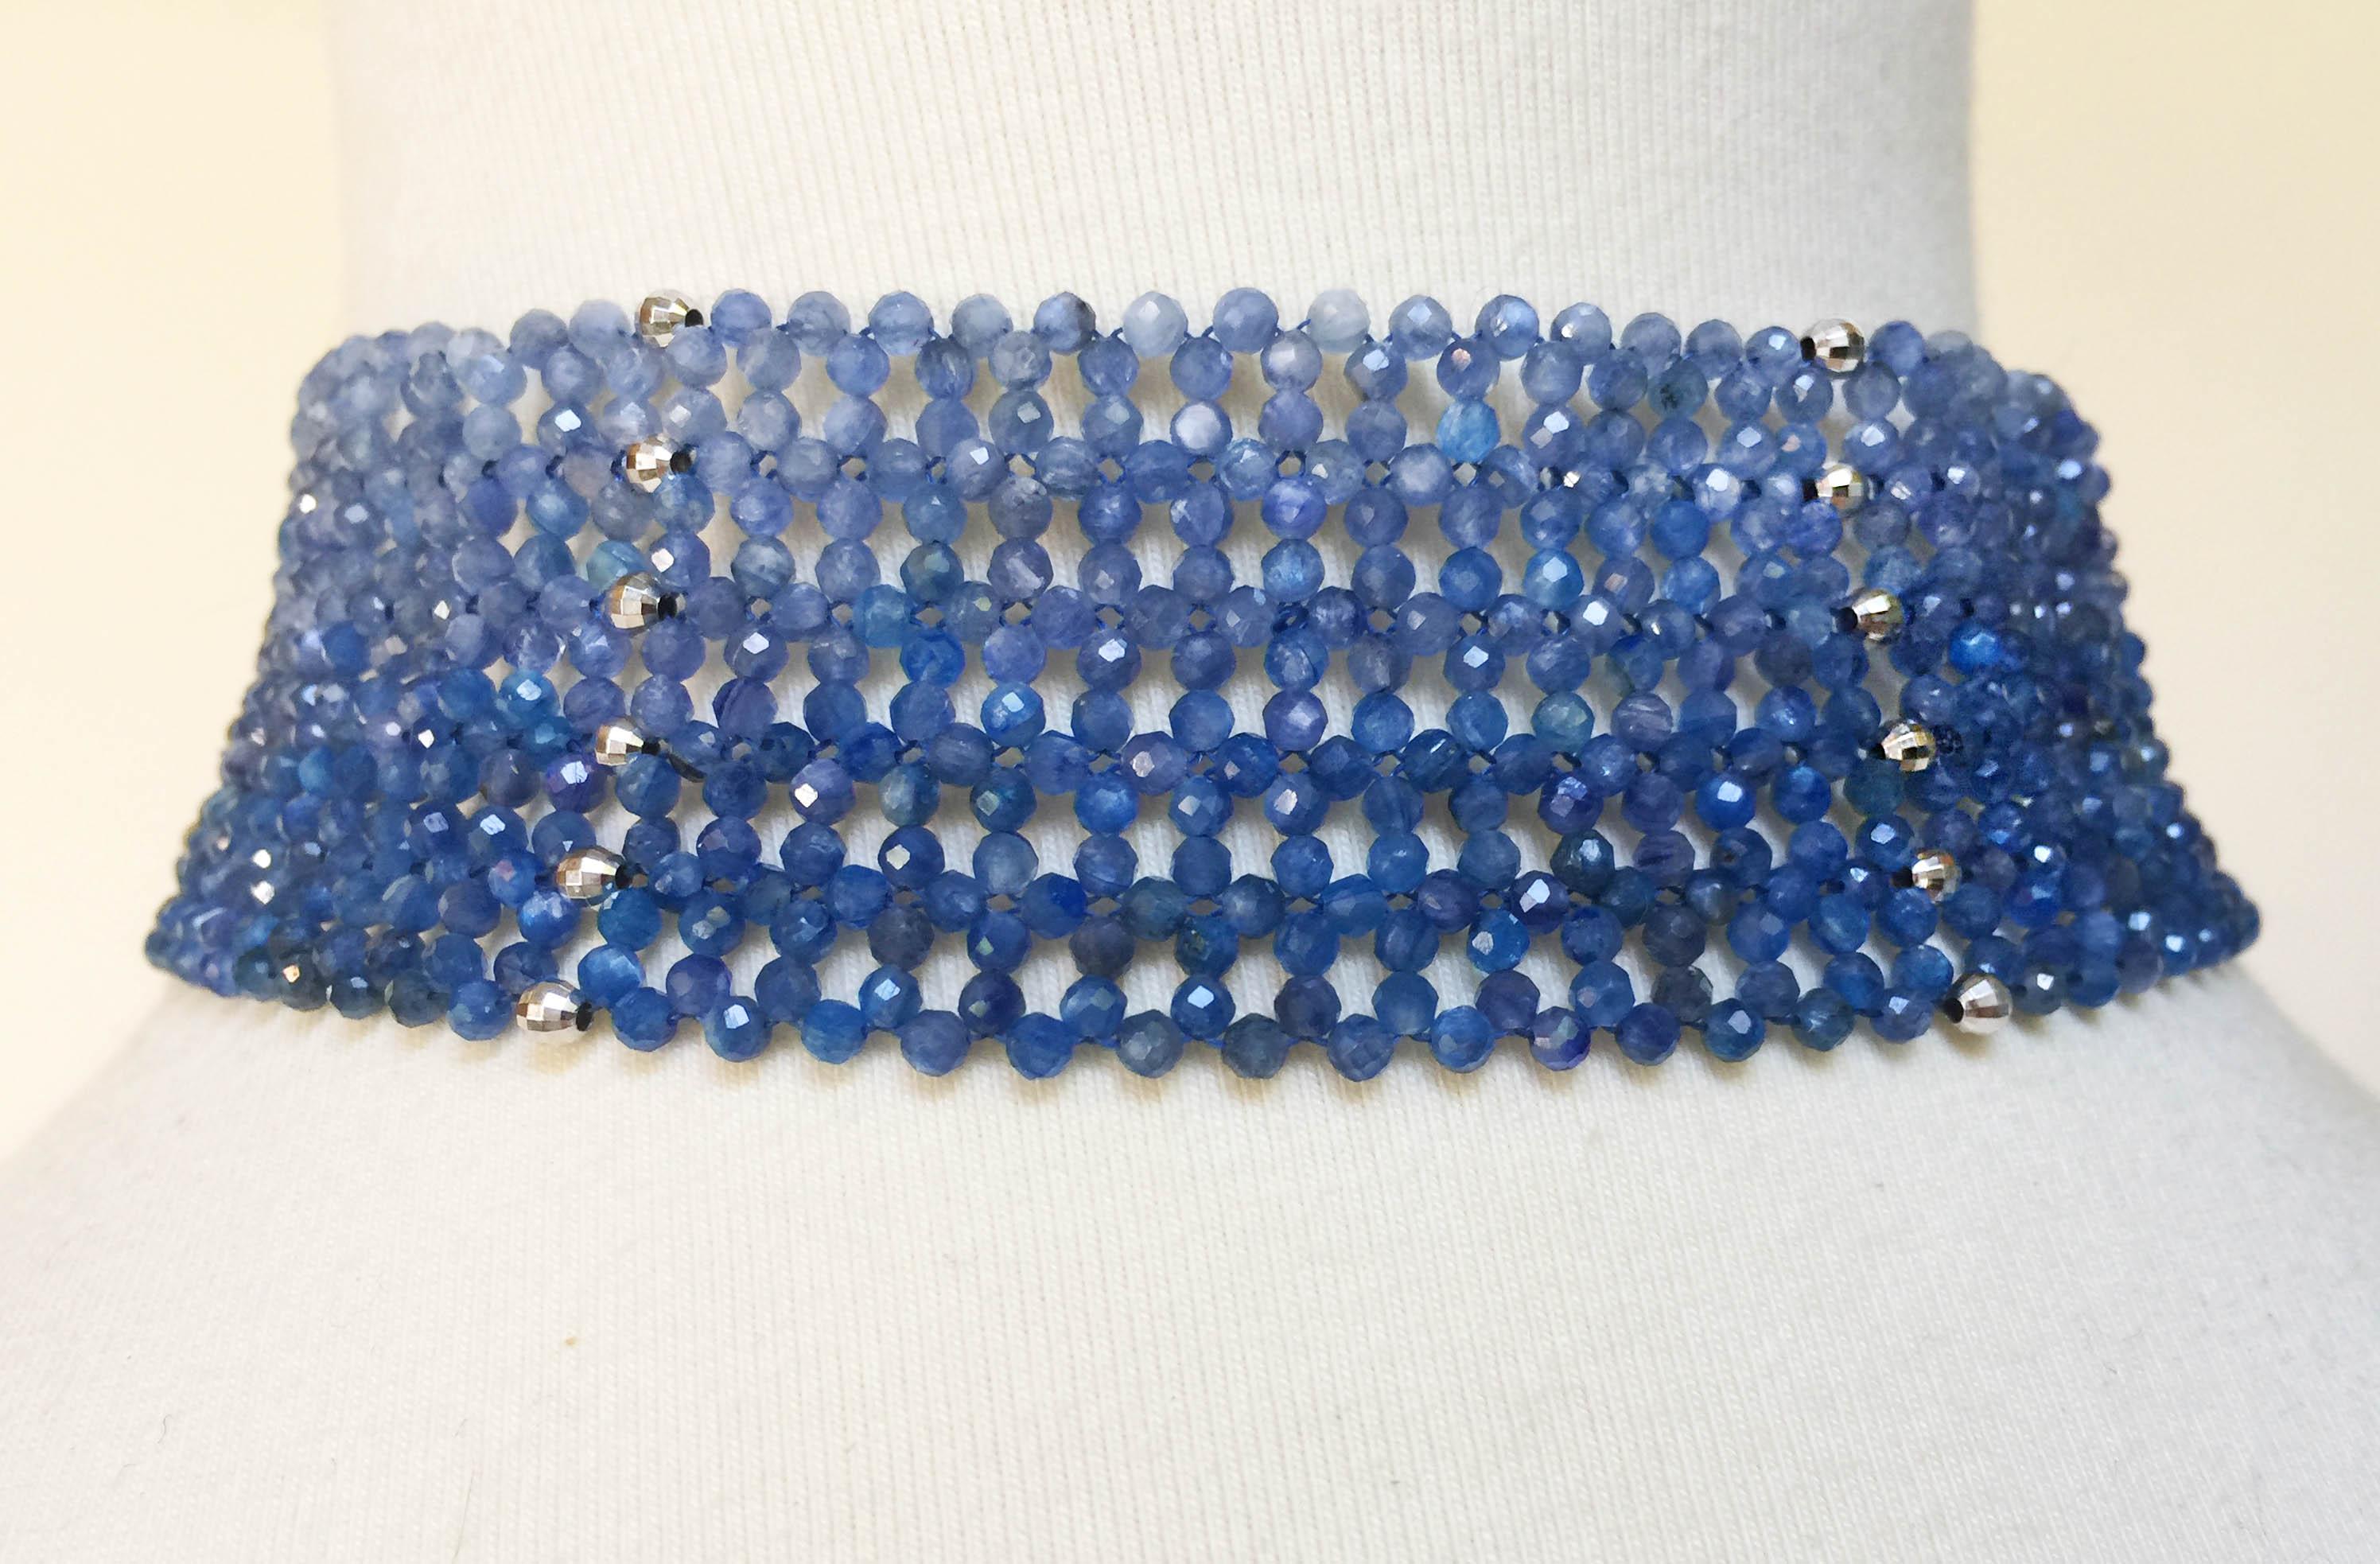 This woven kyanite beaded choker has a sterling silver (rhodium plated) sliding clasp highlighted with faceted sterling silver (rhodium plated) beads. The blue kyanite beads are woven with an ombre effect from an elegant light blue to a deep royal